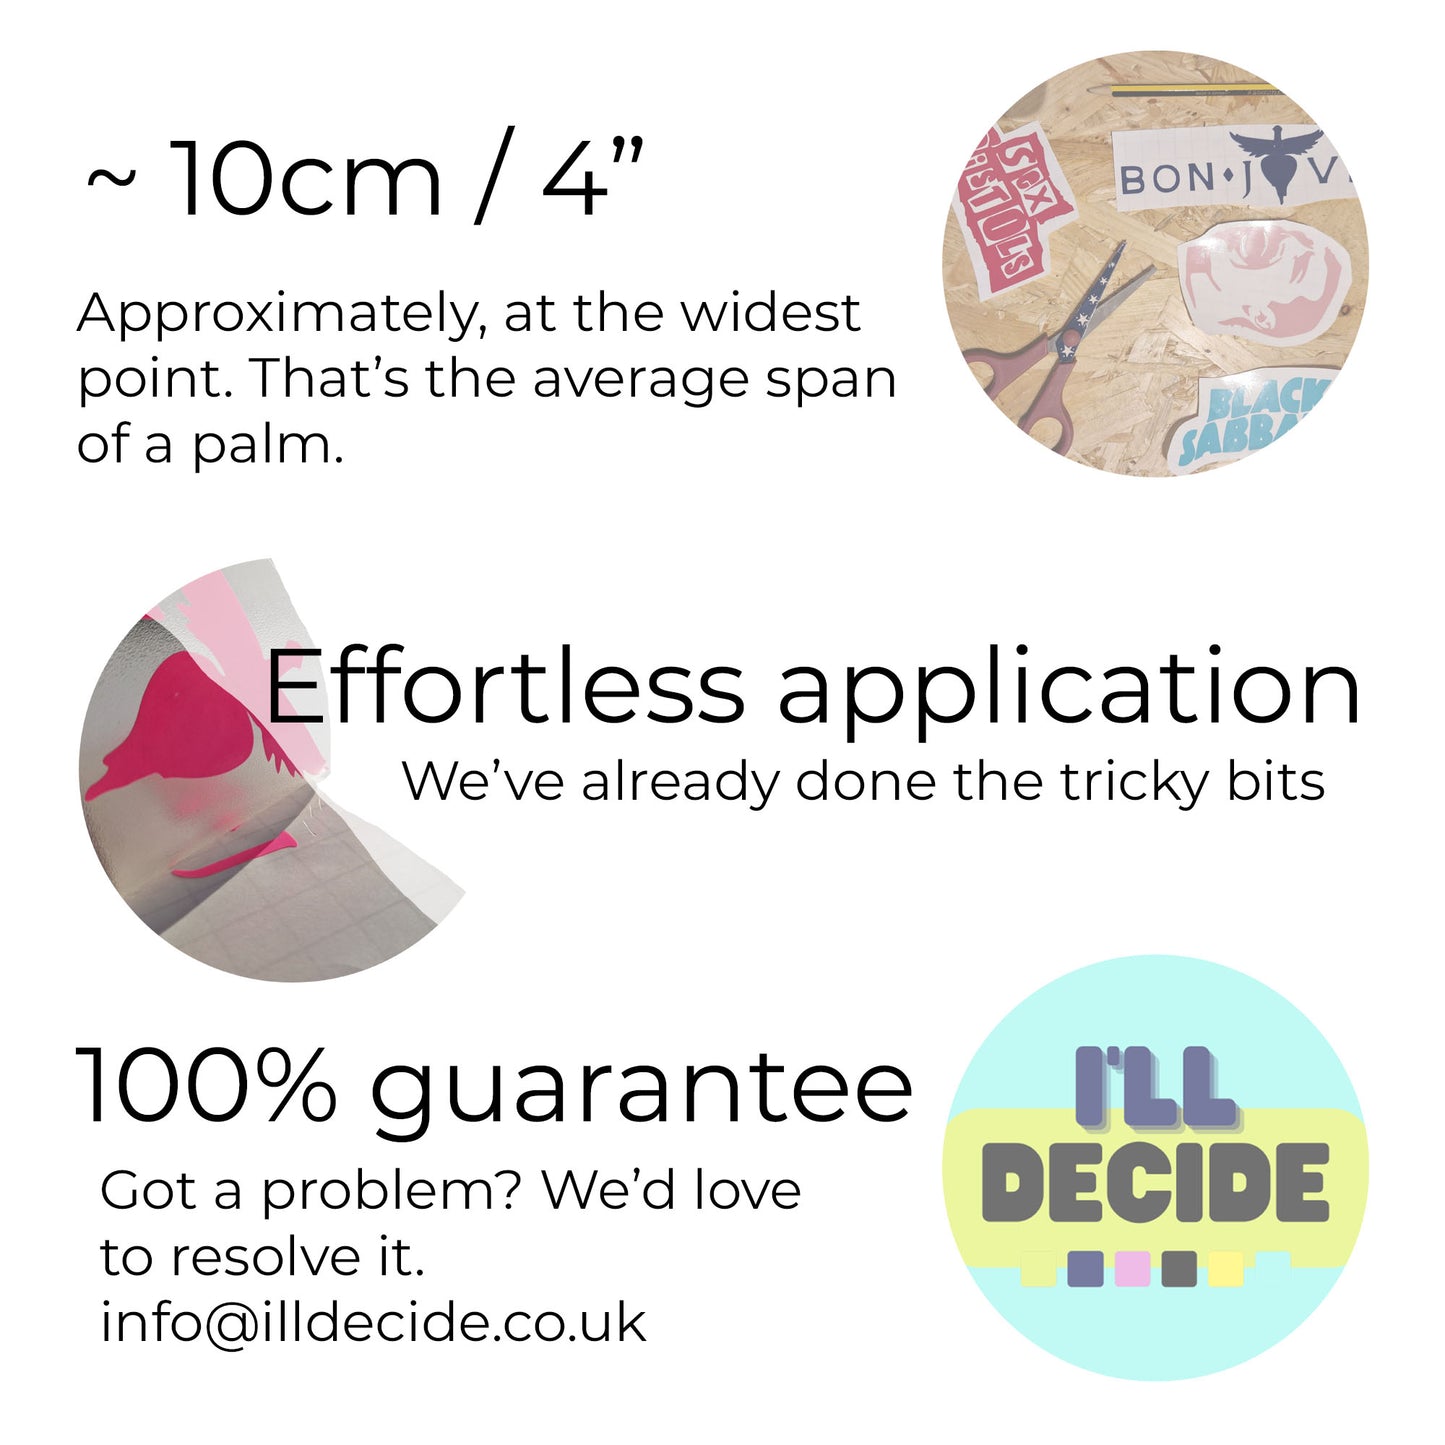 100% guarantee, approximately 10cm at widest point, effortless application